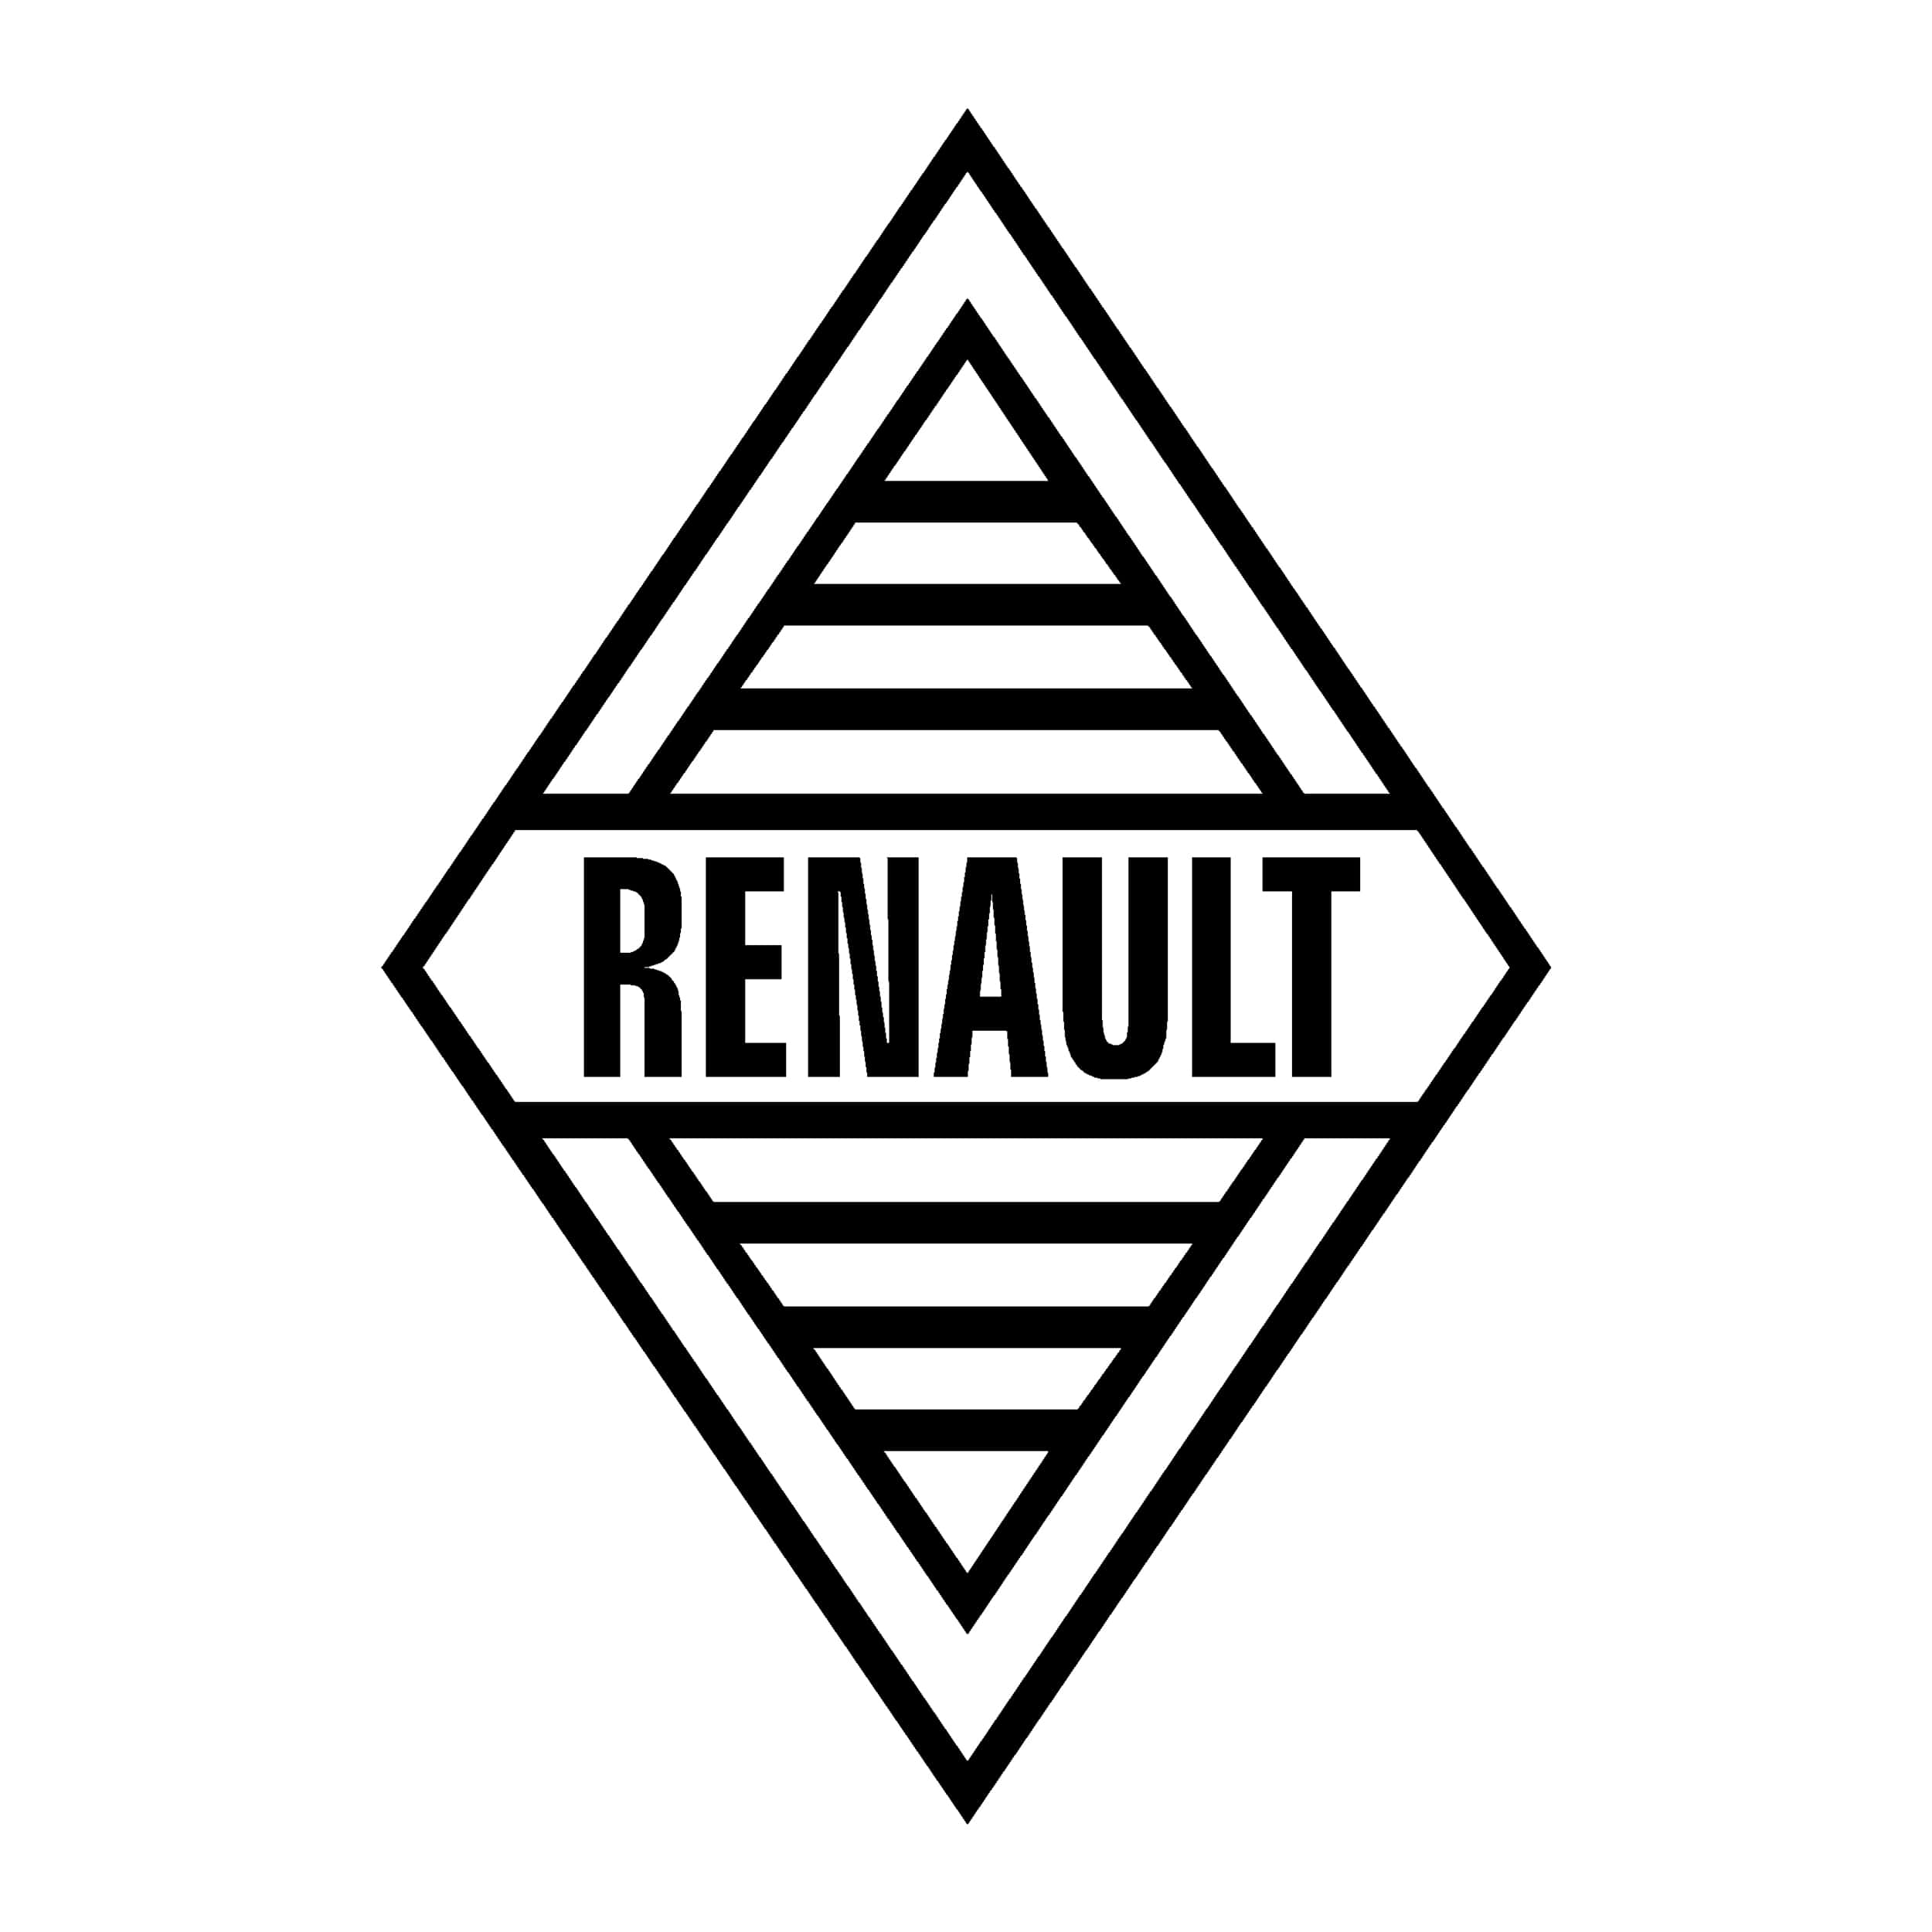 stickers-ref-60-renault-sport-logo-losange-1960-1972-voiture-tuning-competition-deco-adhesive-auto-racing-rallye-min